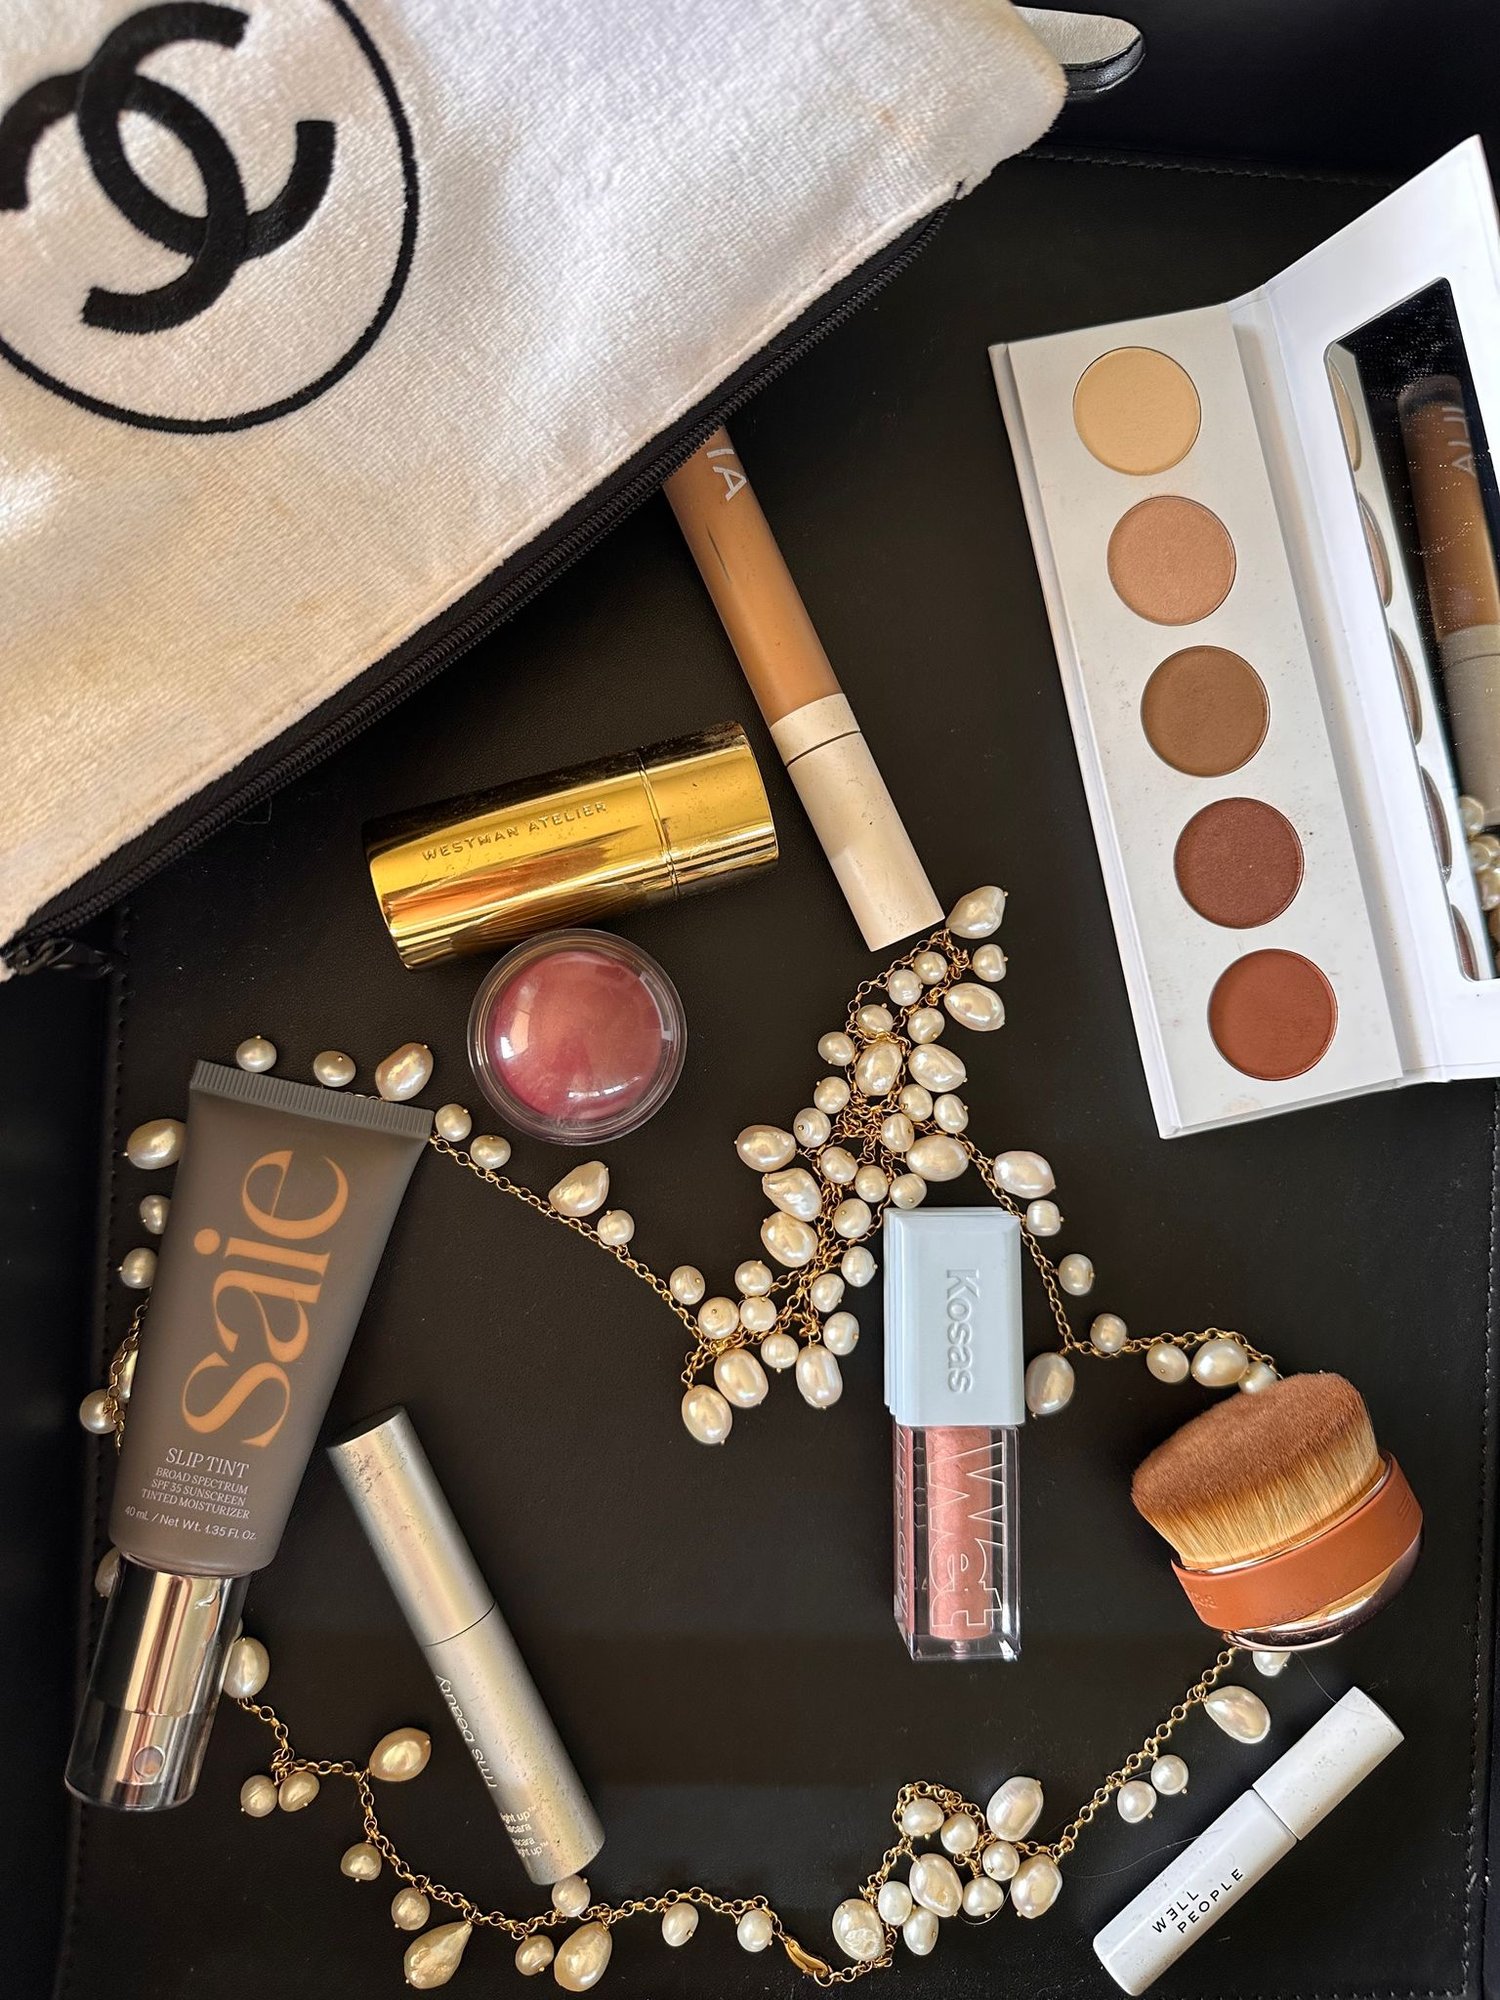 8 Makeup Holiday Gift Sets to Impress Any Clean Beauty Lover — The Glow  Girl by Melissa Meyers